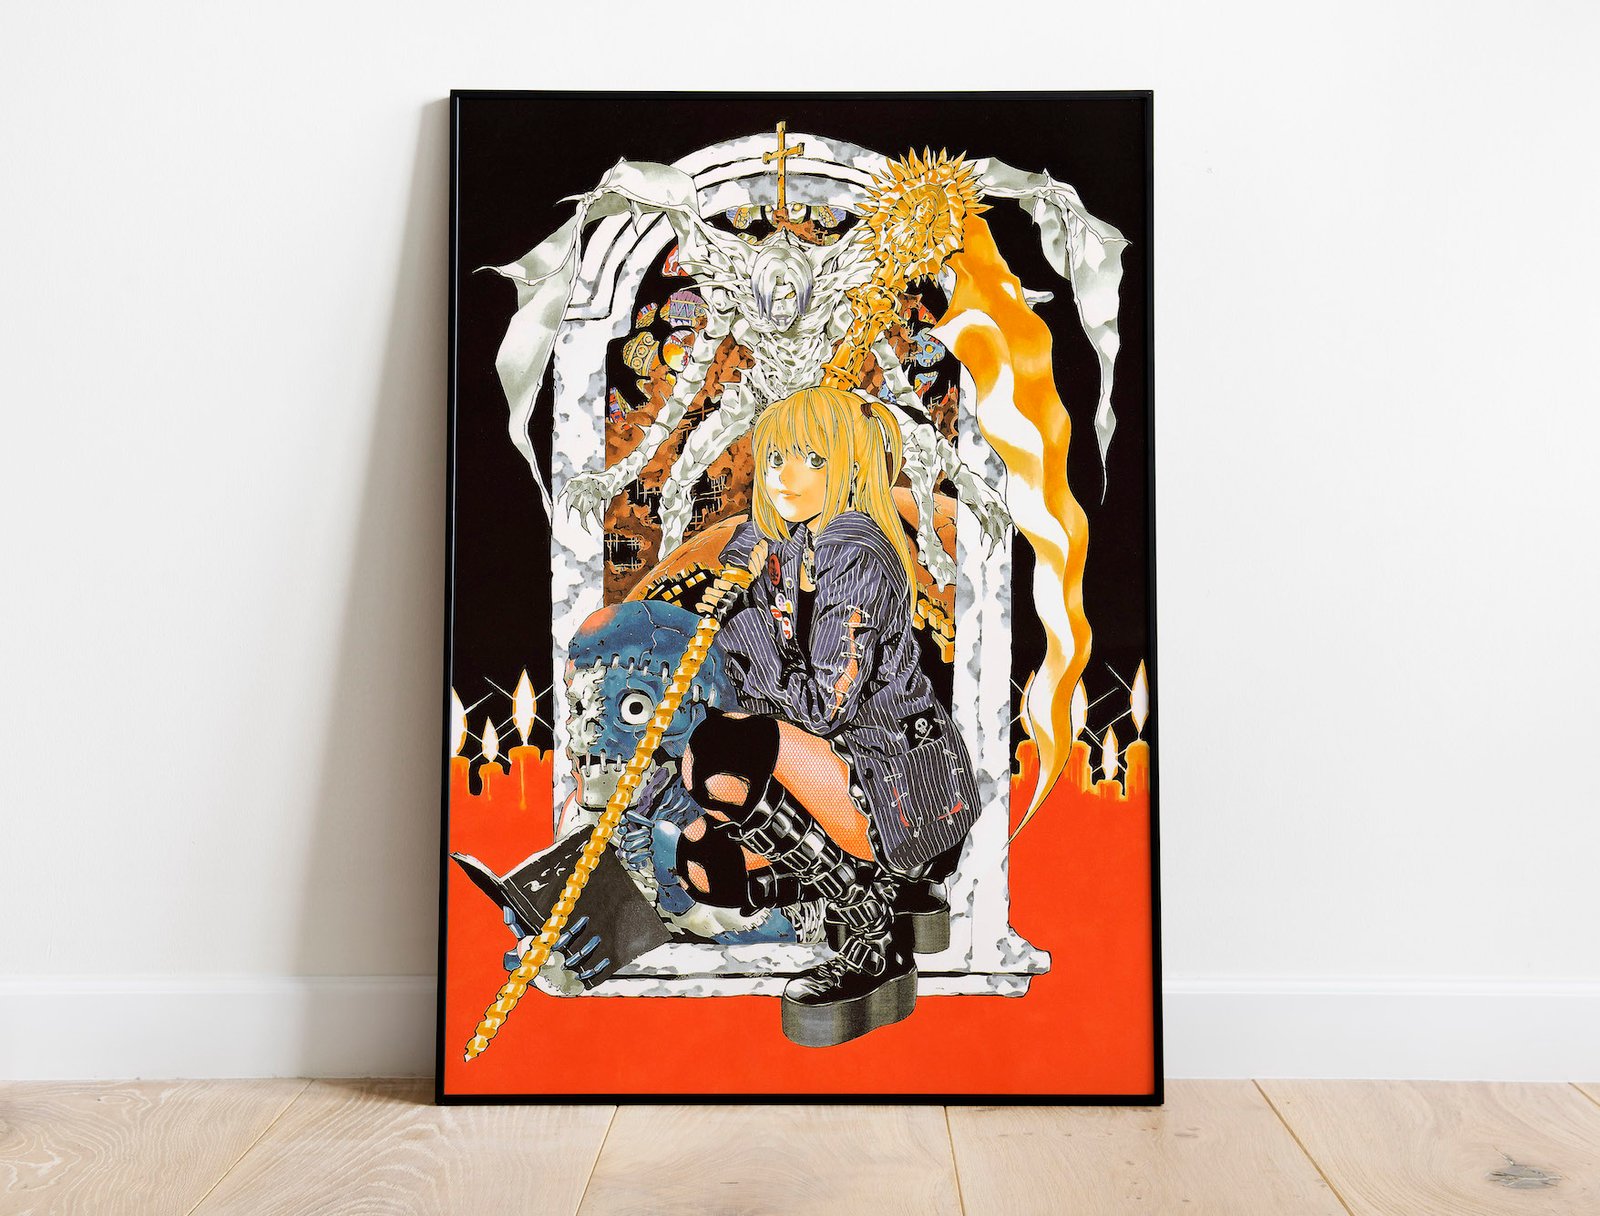 Amazon.com: Death Note Poster Anime Japanese Animation Cartoon 16x20  Inches: Posters & Prints